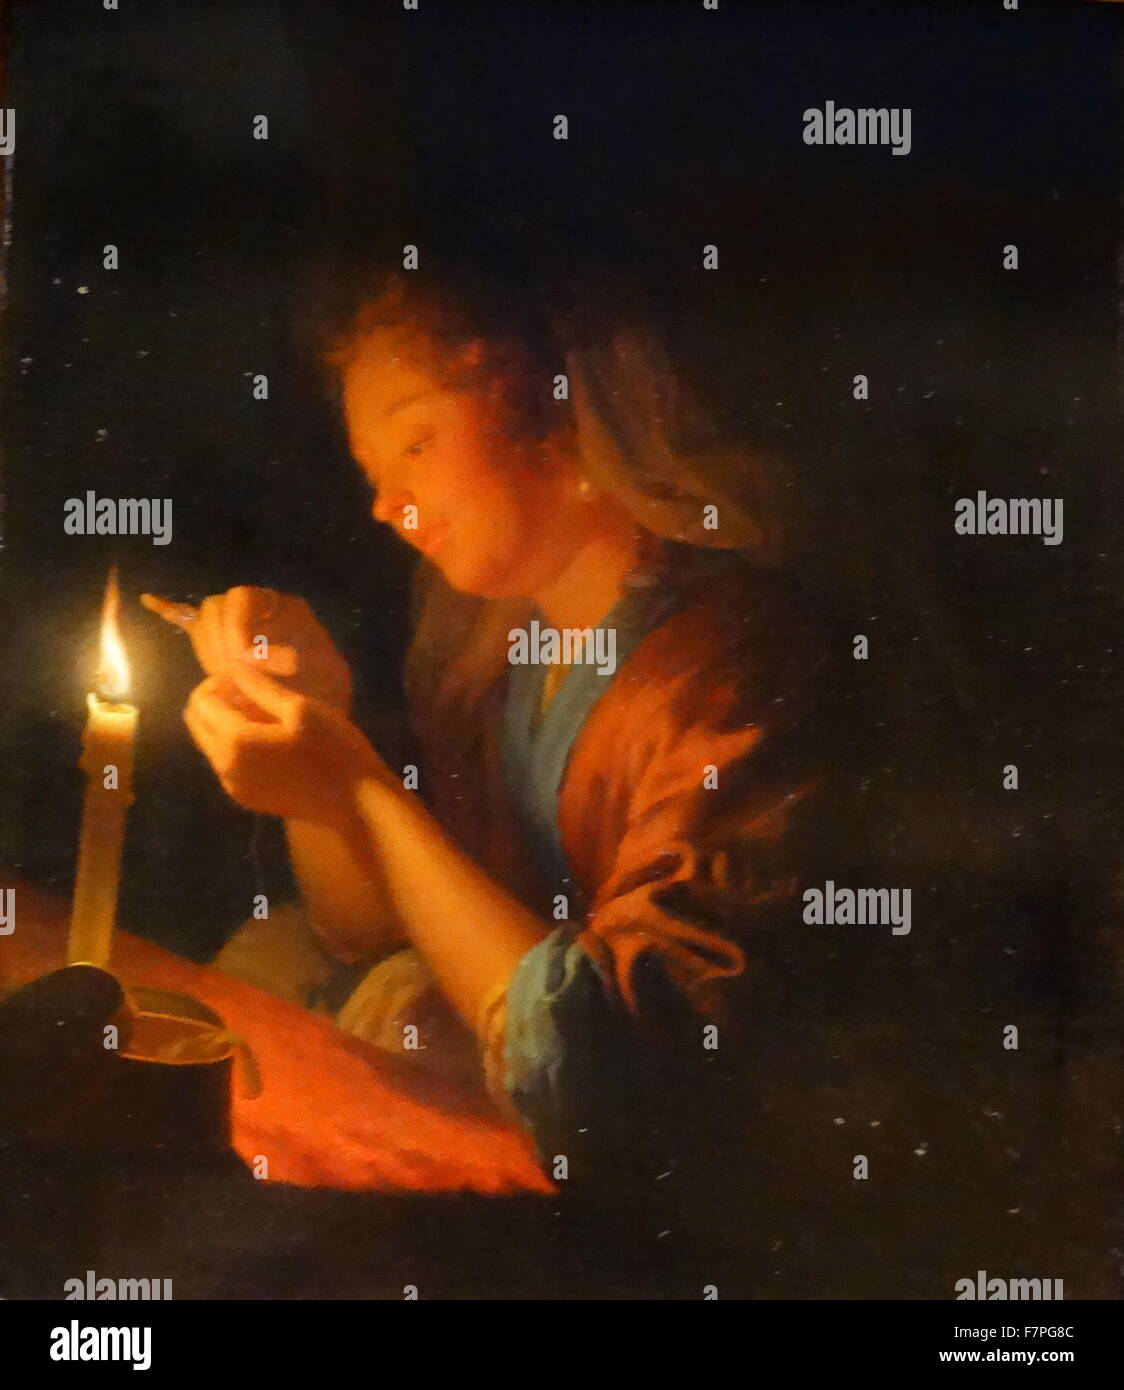 A Girl Threading a Needle by Candlelight by G. Schalcken (1643-1706). From the Dutch School. Stock Photo